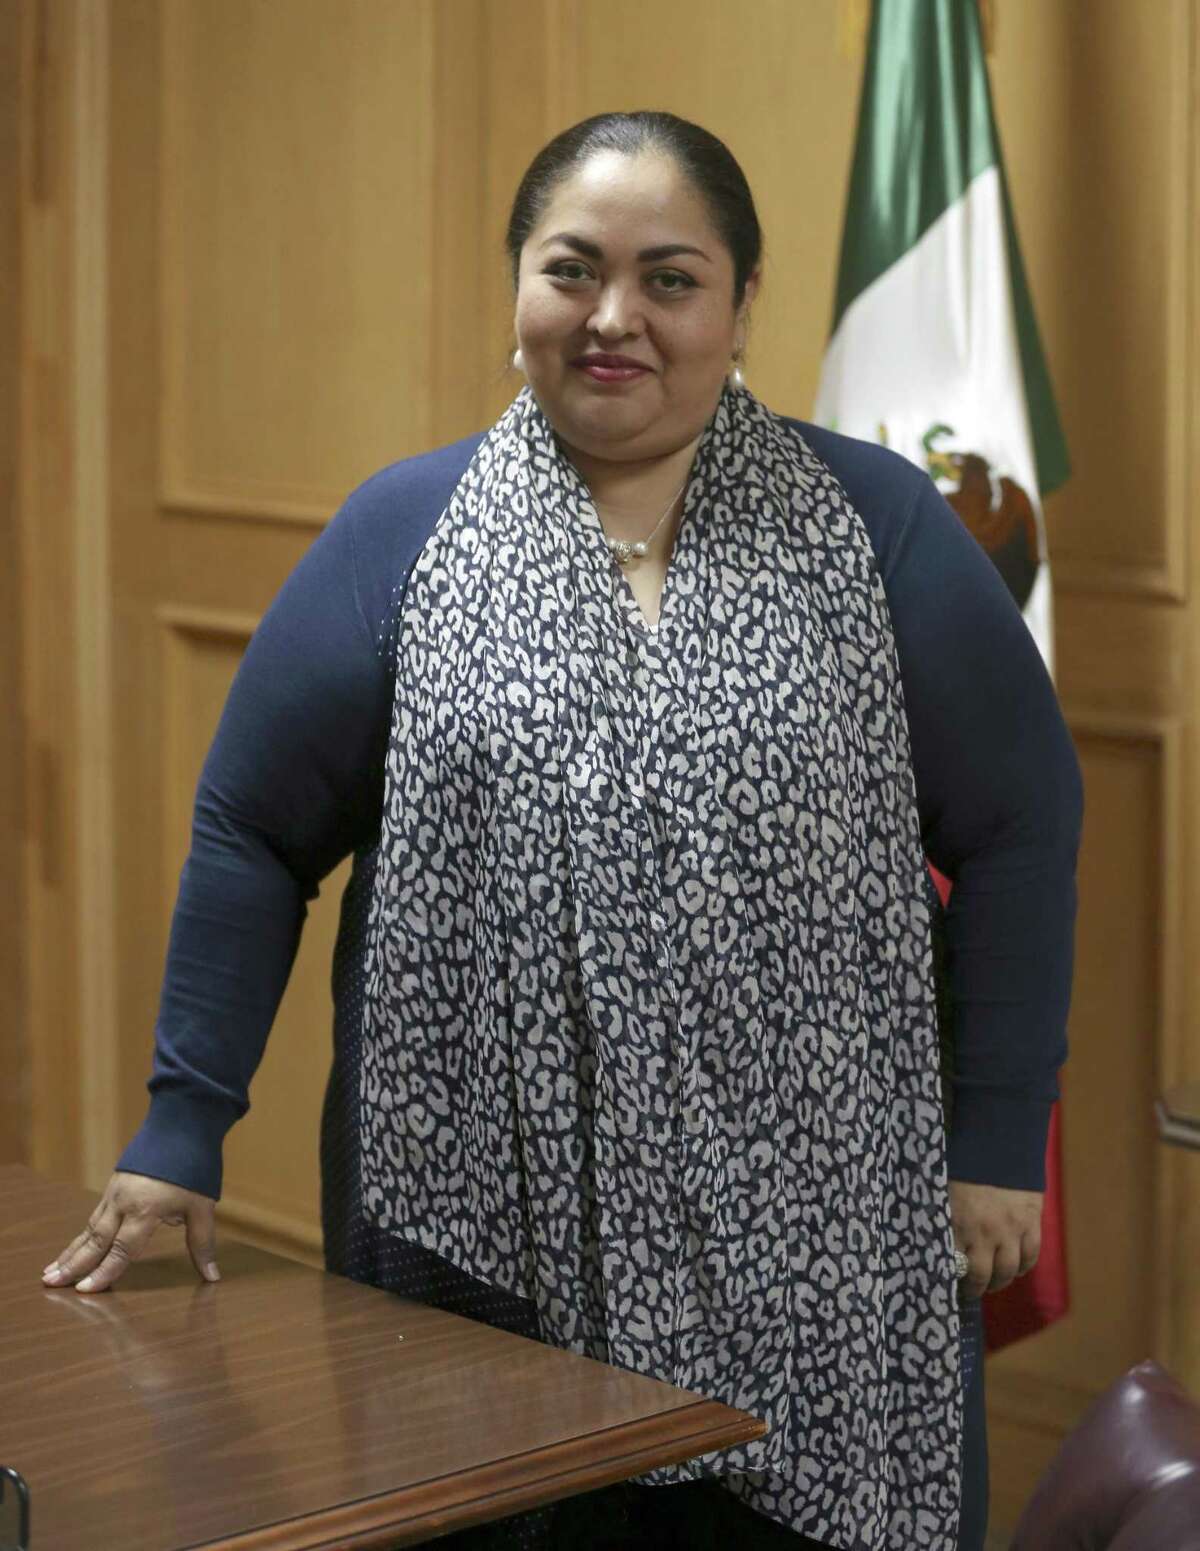 Ambassador Reyna Torres Mendivil, seen April 27, 2017 in her office, became the Consul General of Mexico in San Antonio, on April 16, 2017. She has been in the Mexican Foreign Service Service since 1991.